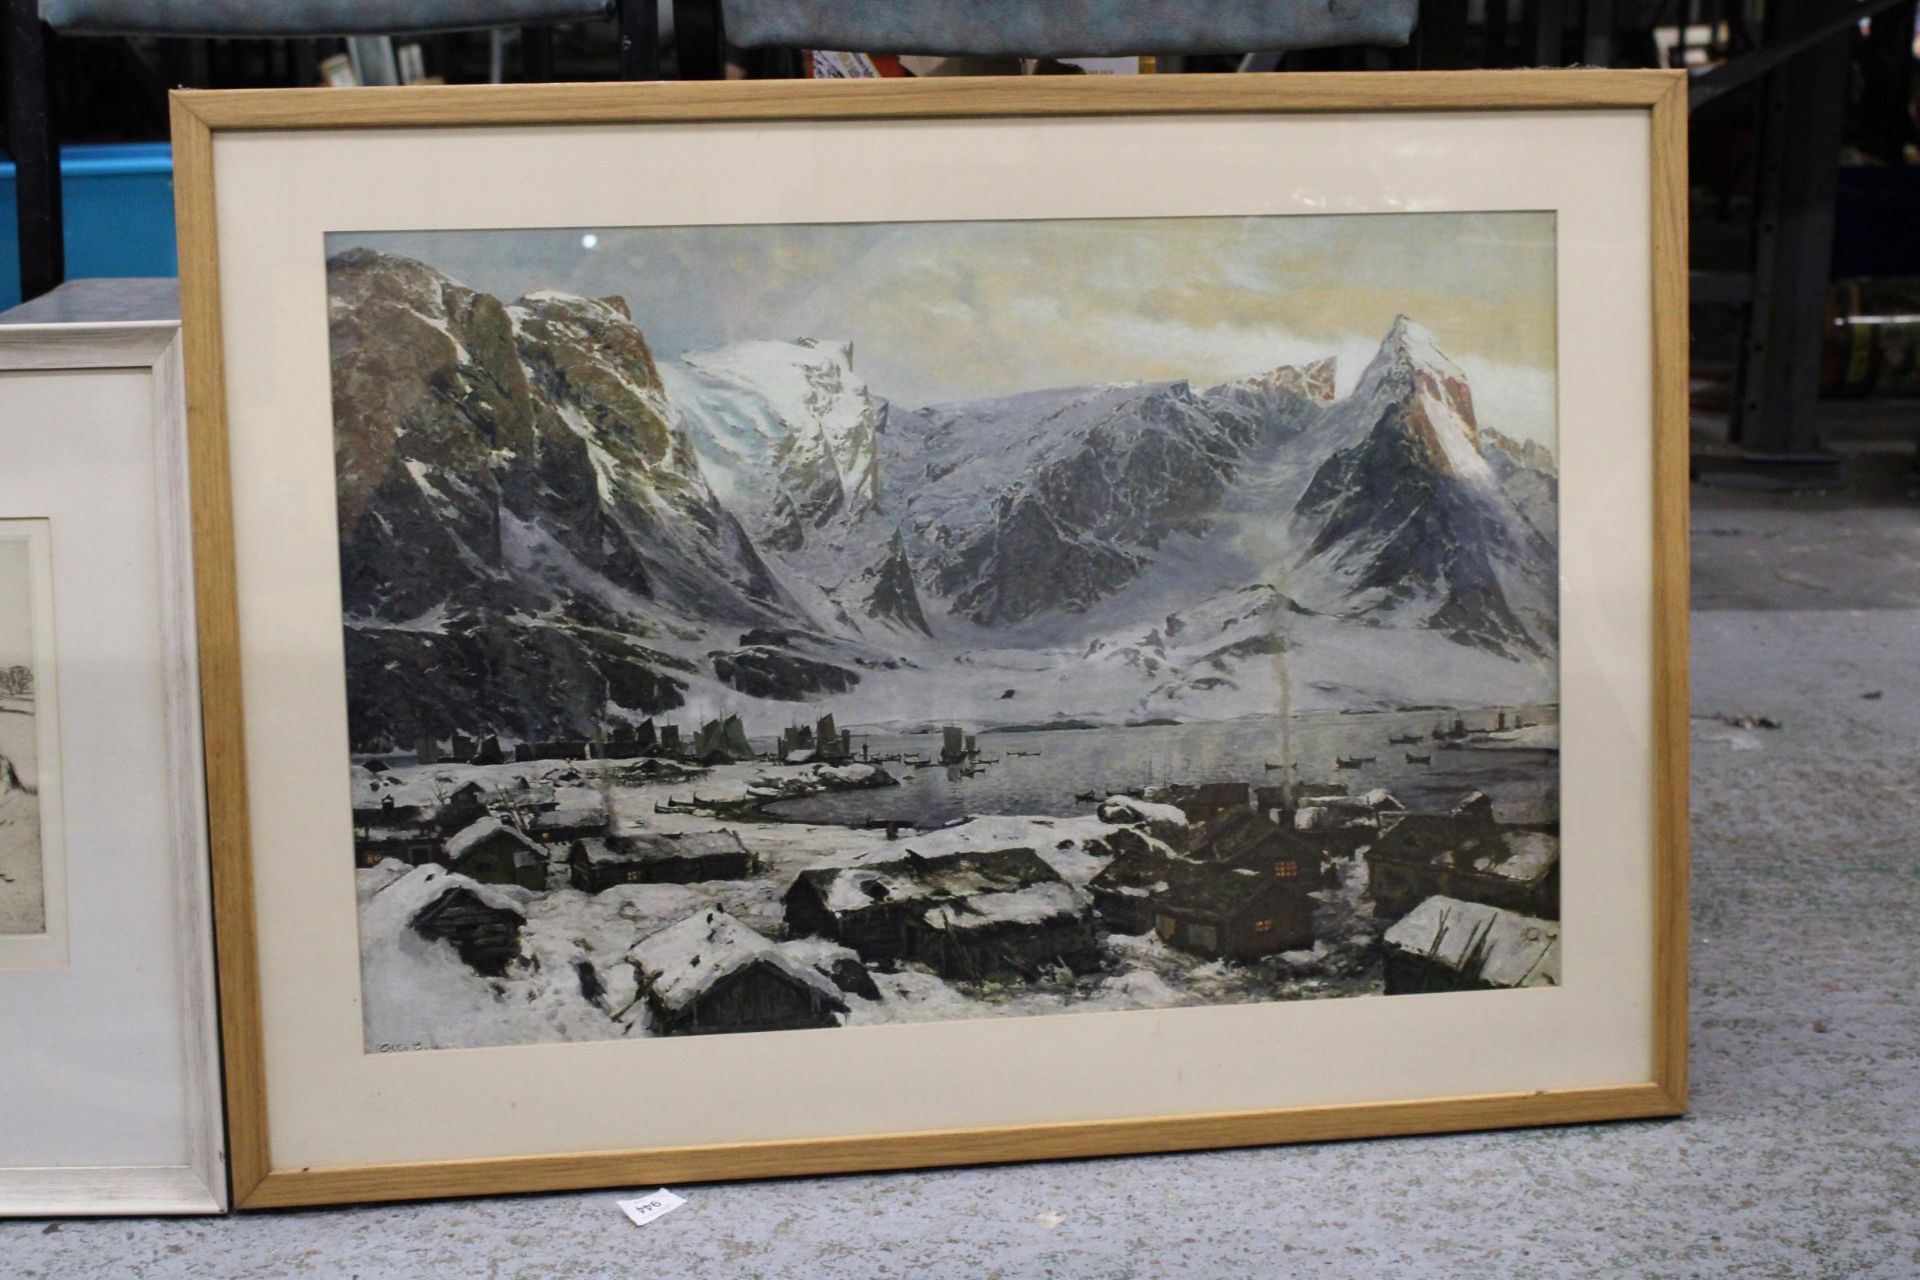 THREE FRAMED PRINTS, A MOUNTAIN SCENE, FLORAL AND HUNTING DOGS - Image 3 of 4